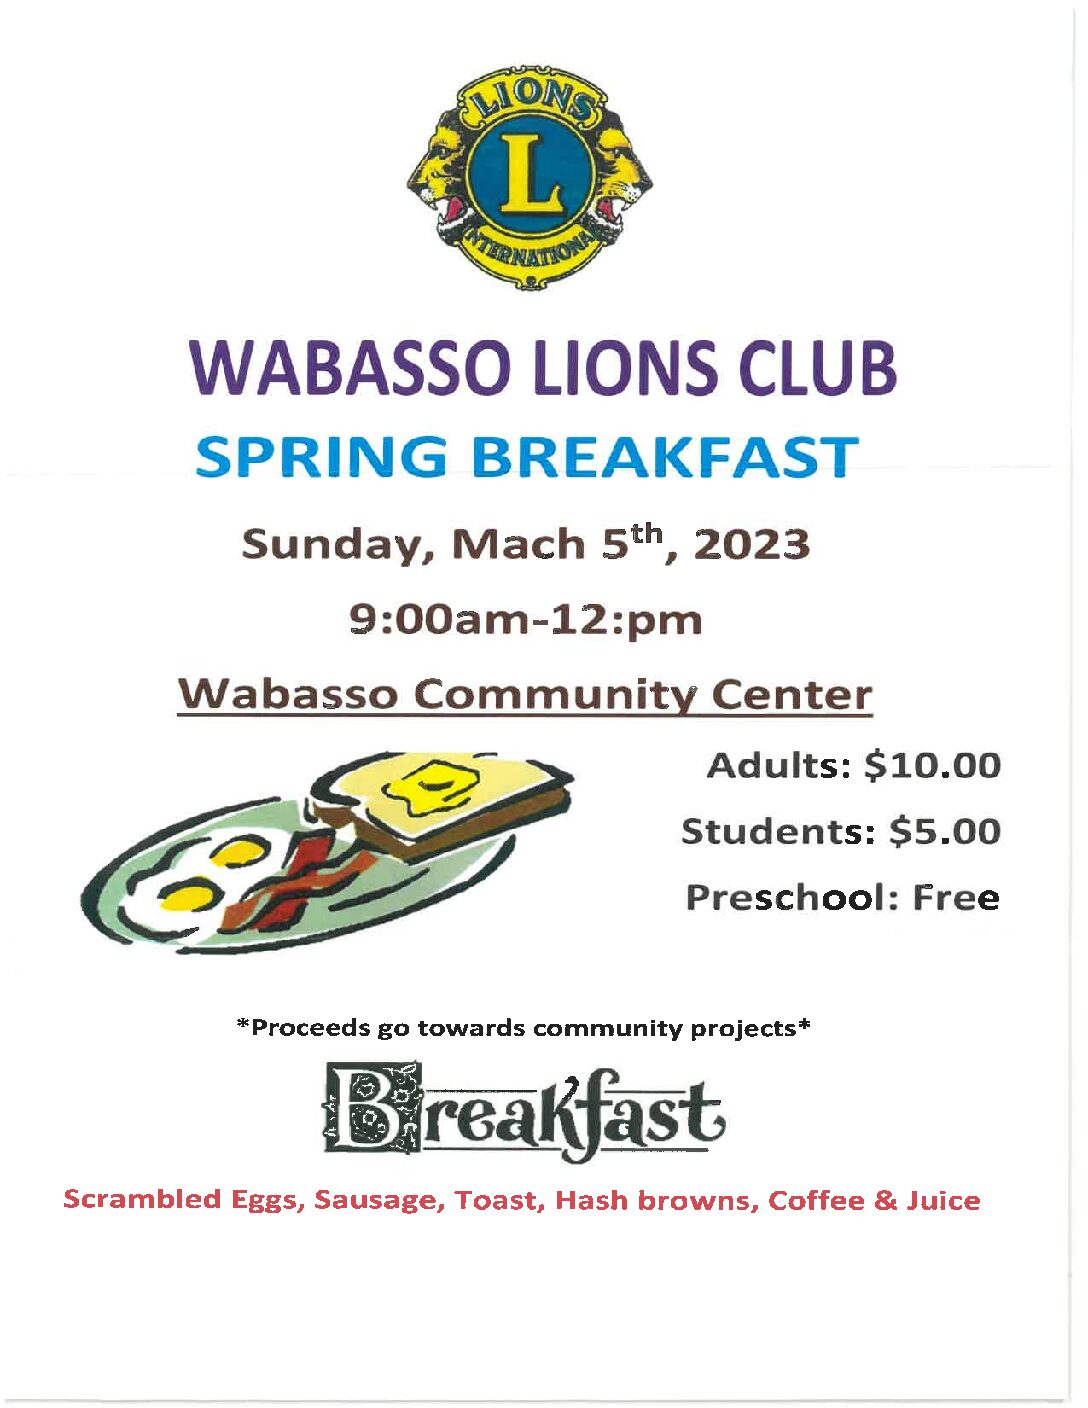 <h1 class="tribe-events-single-event-title">Wabasso Lions Club Spring Breakfast</h1>